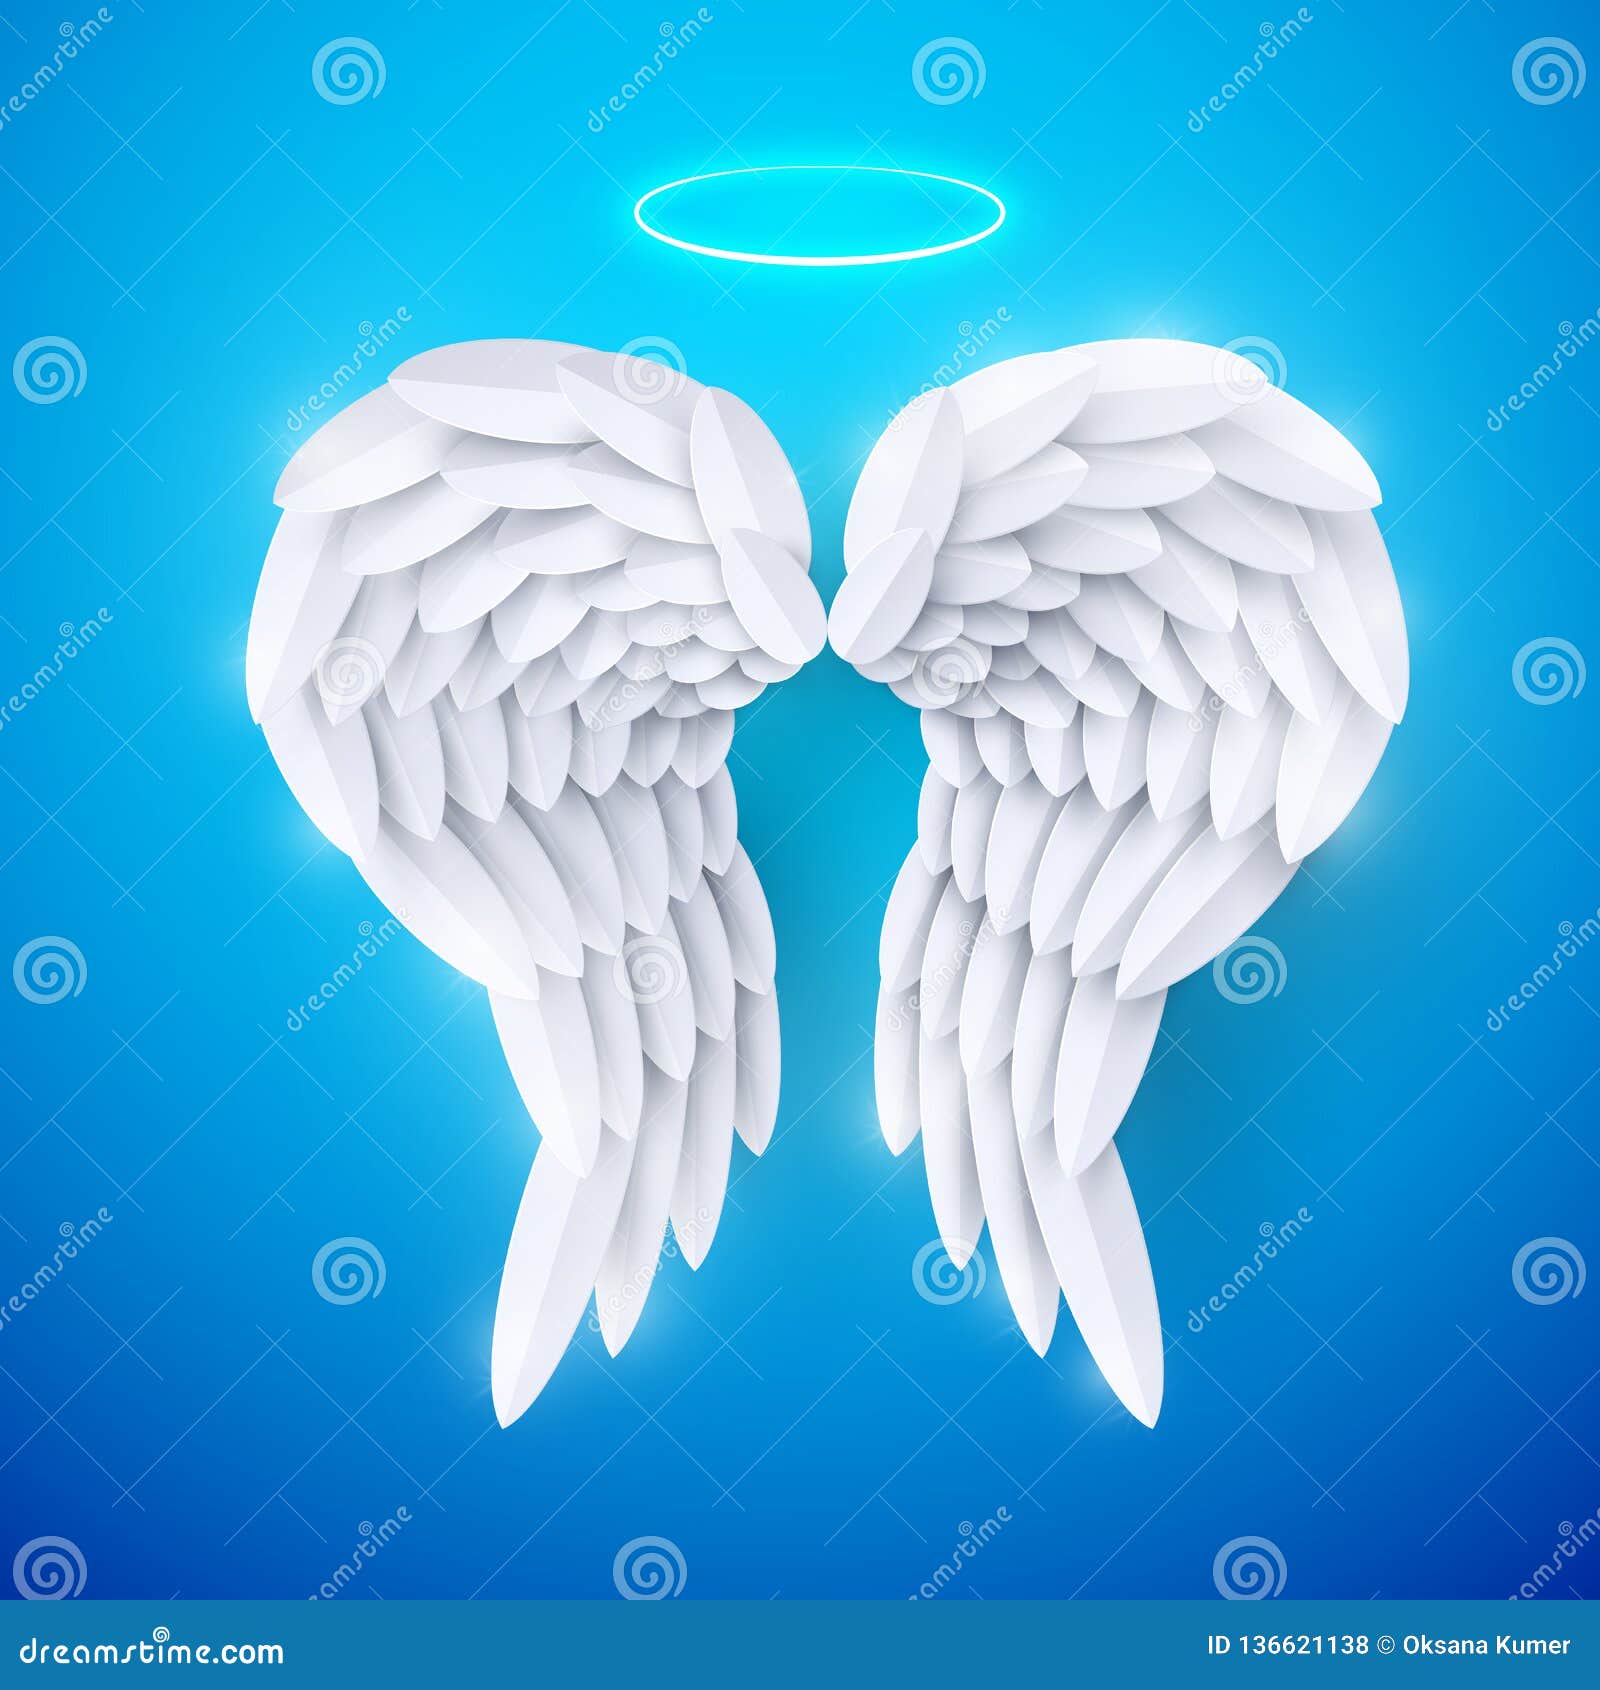 Download Vector 3d White Realistic Layered Paper Cut Angel Wings ...